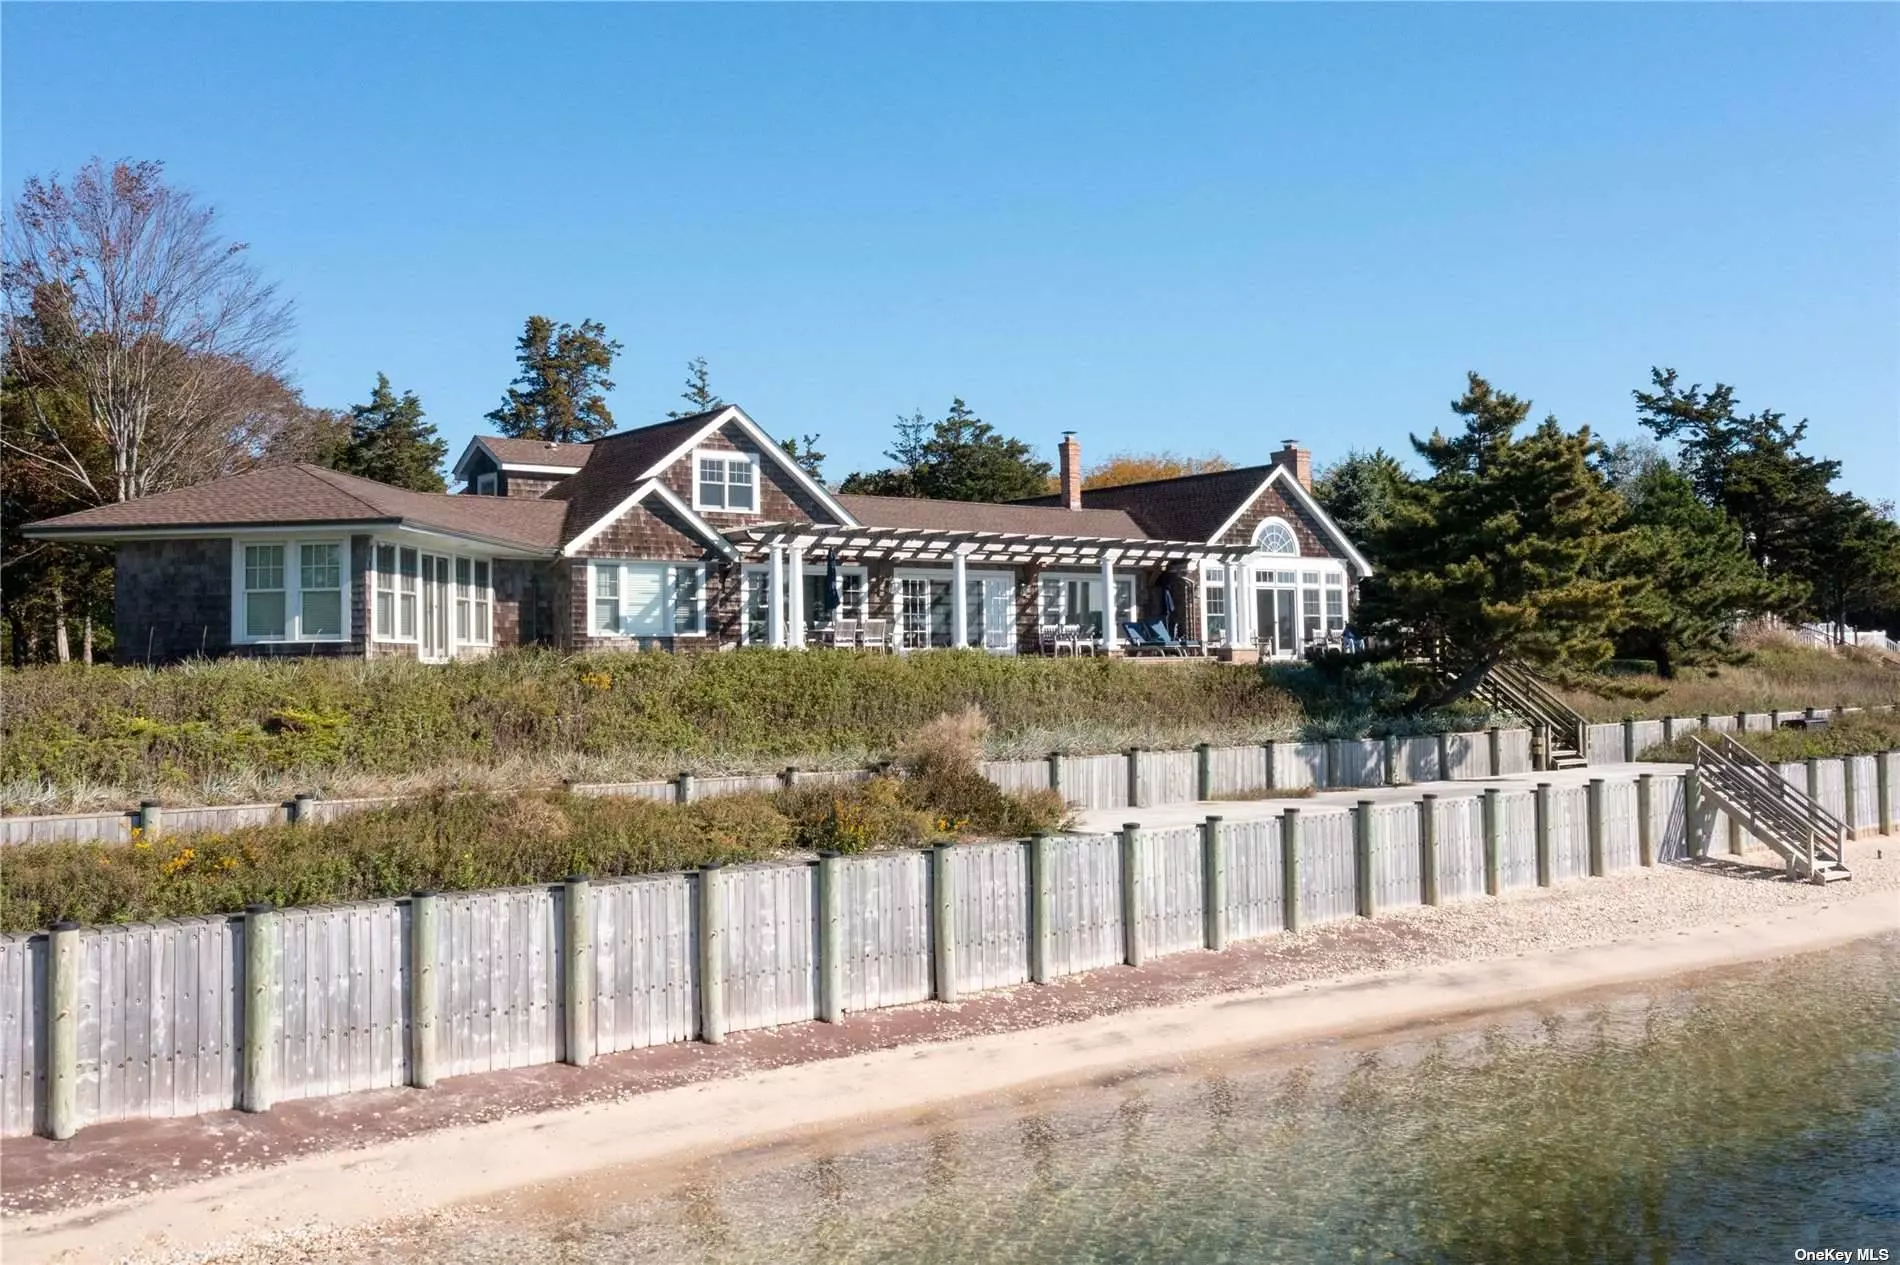 Rare Opportunity To Own a Bayfront Property in prestigious Cedar Beach with a dock. Natural tranquility graces this expansive and secluded home in the heart of Southold. This unique property combines a double-wide bayfront lot with a path across a country lane to your own private dock with one space for a boat, on an inlet leading to the bay. A sophisticated home for the discerning buyer that combines organic textures with hand-crafted finishes. This house exemplifies elegant authenticity boasting a family room with a cathedral ceiling, a slate fireplace, two ensuite primary bedrooms, a living room, and a dining room waterside with sweeping panoramic views. A property like this comes along once in a lifetime.